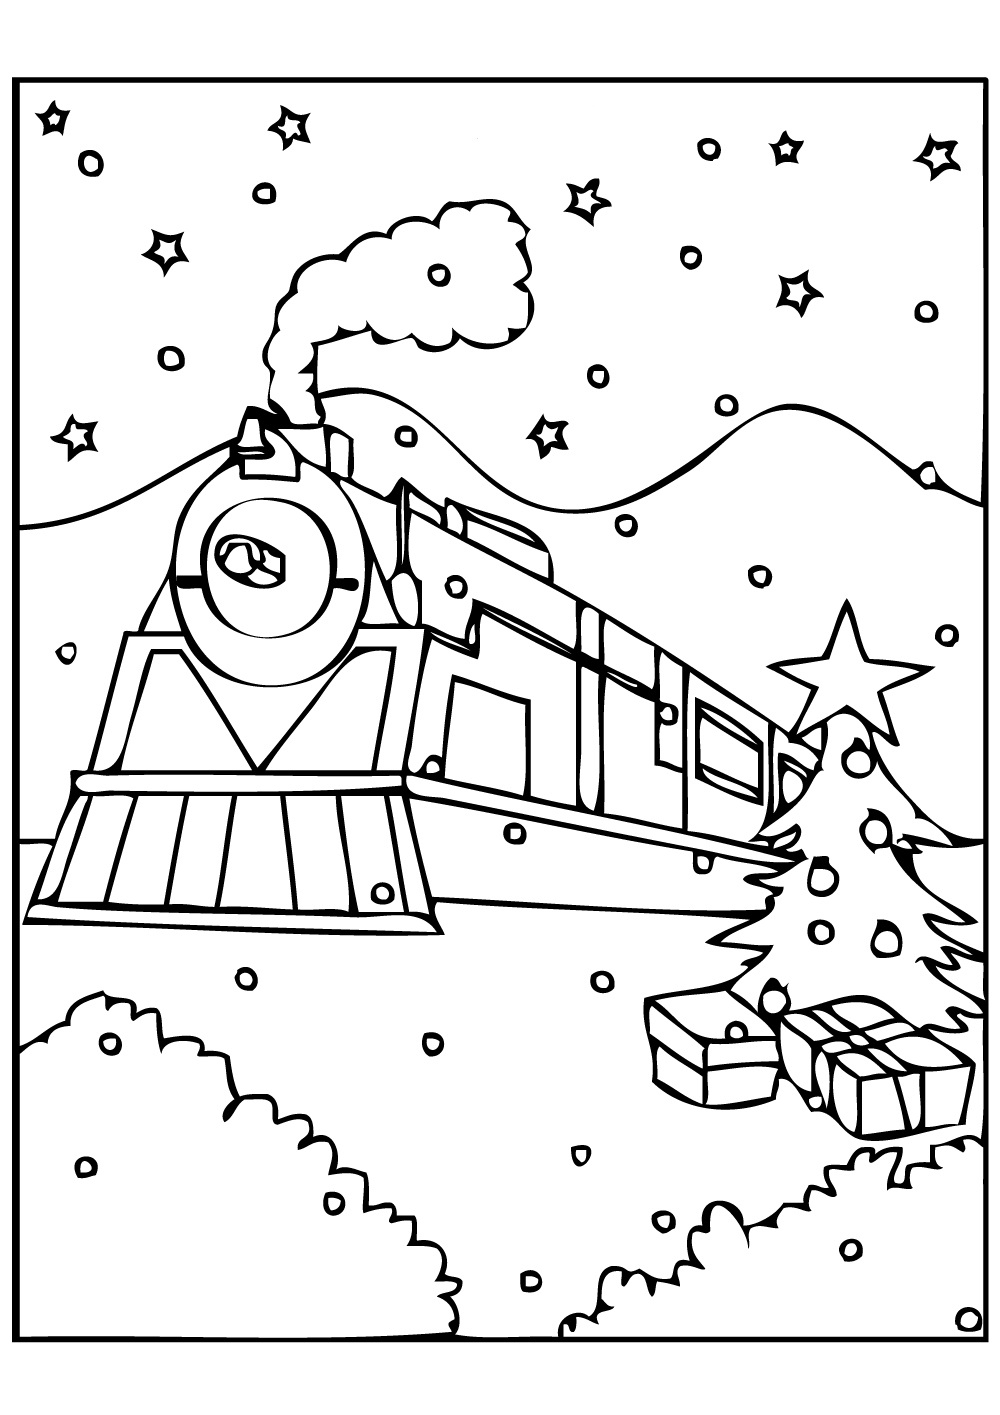 Polar Express Color Pages Polar Express Coloring Pages Best Coloring Pages For Kids